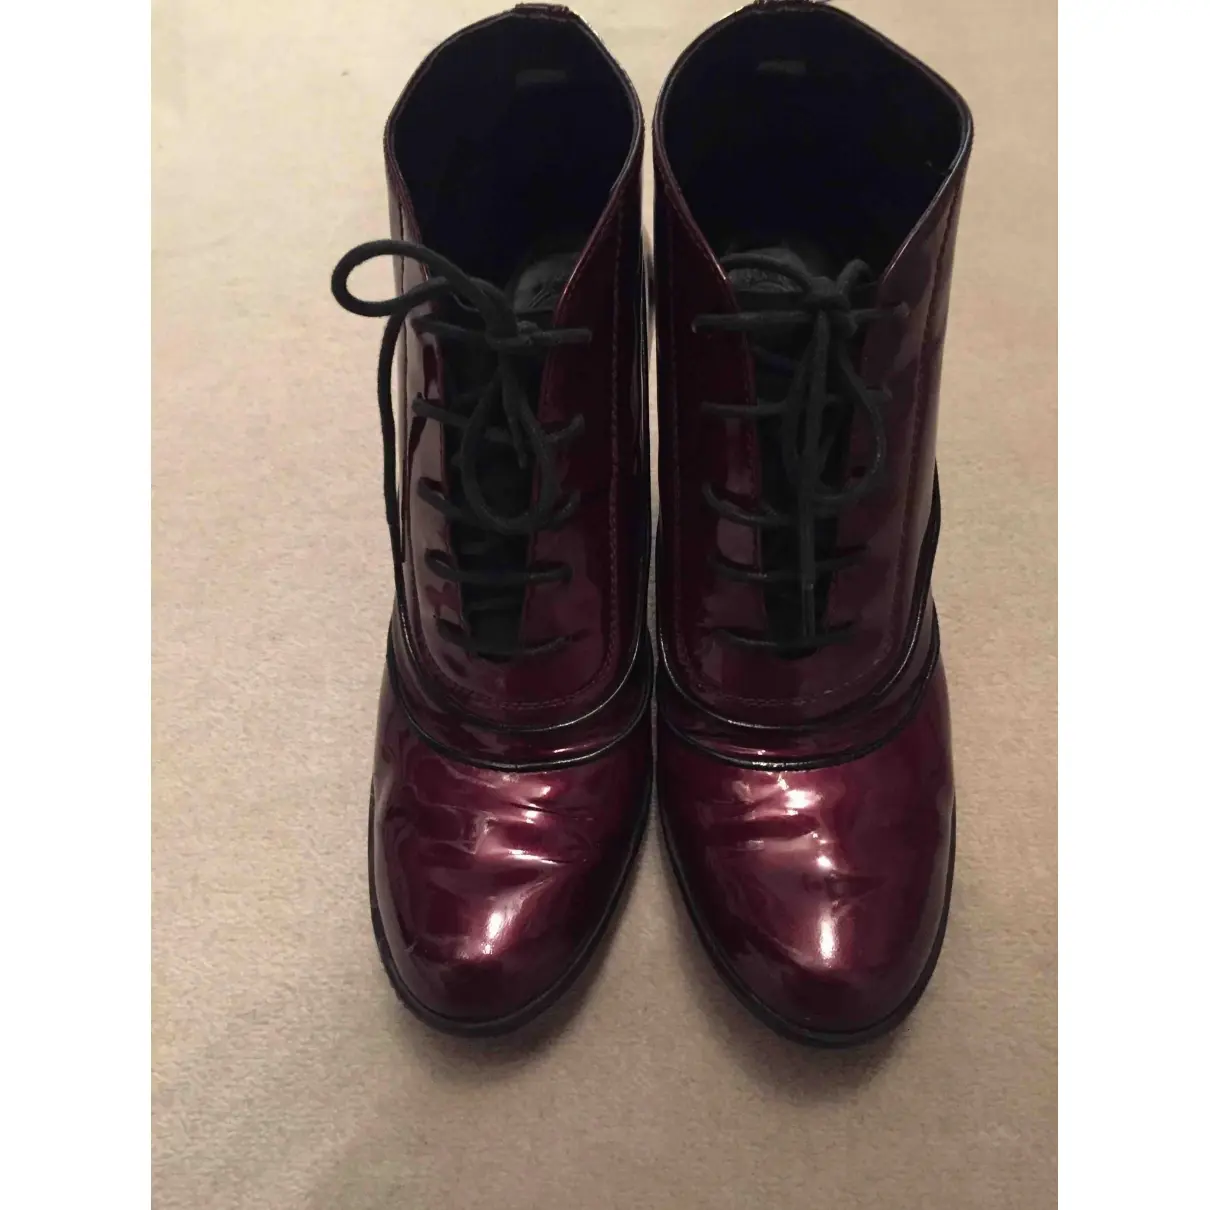 Buy Tod's Patent leather lace up boots online